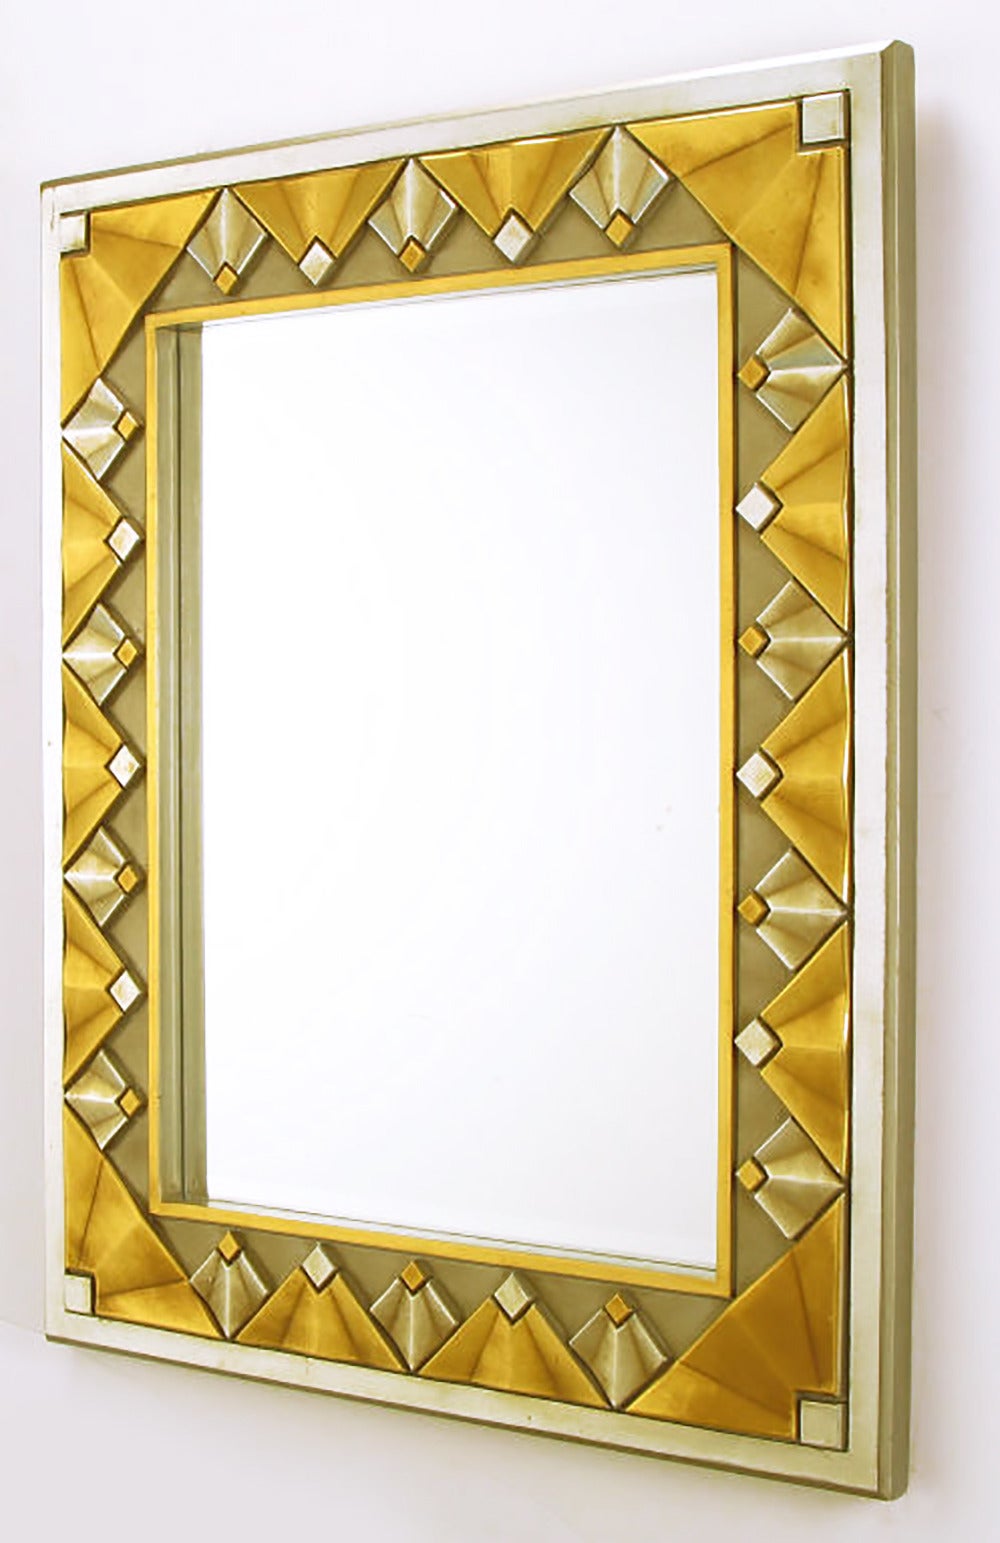 Well-made cast resin Art Deco revival wall mirror in gold and silver leaf with antiqued finish.